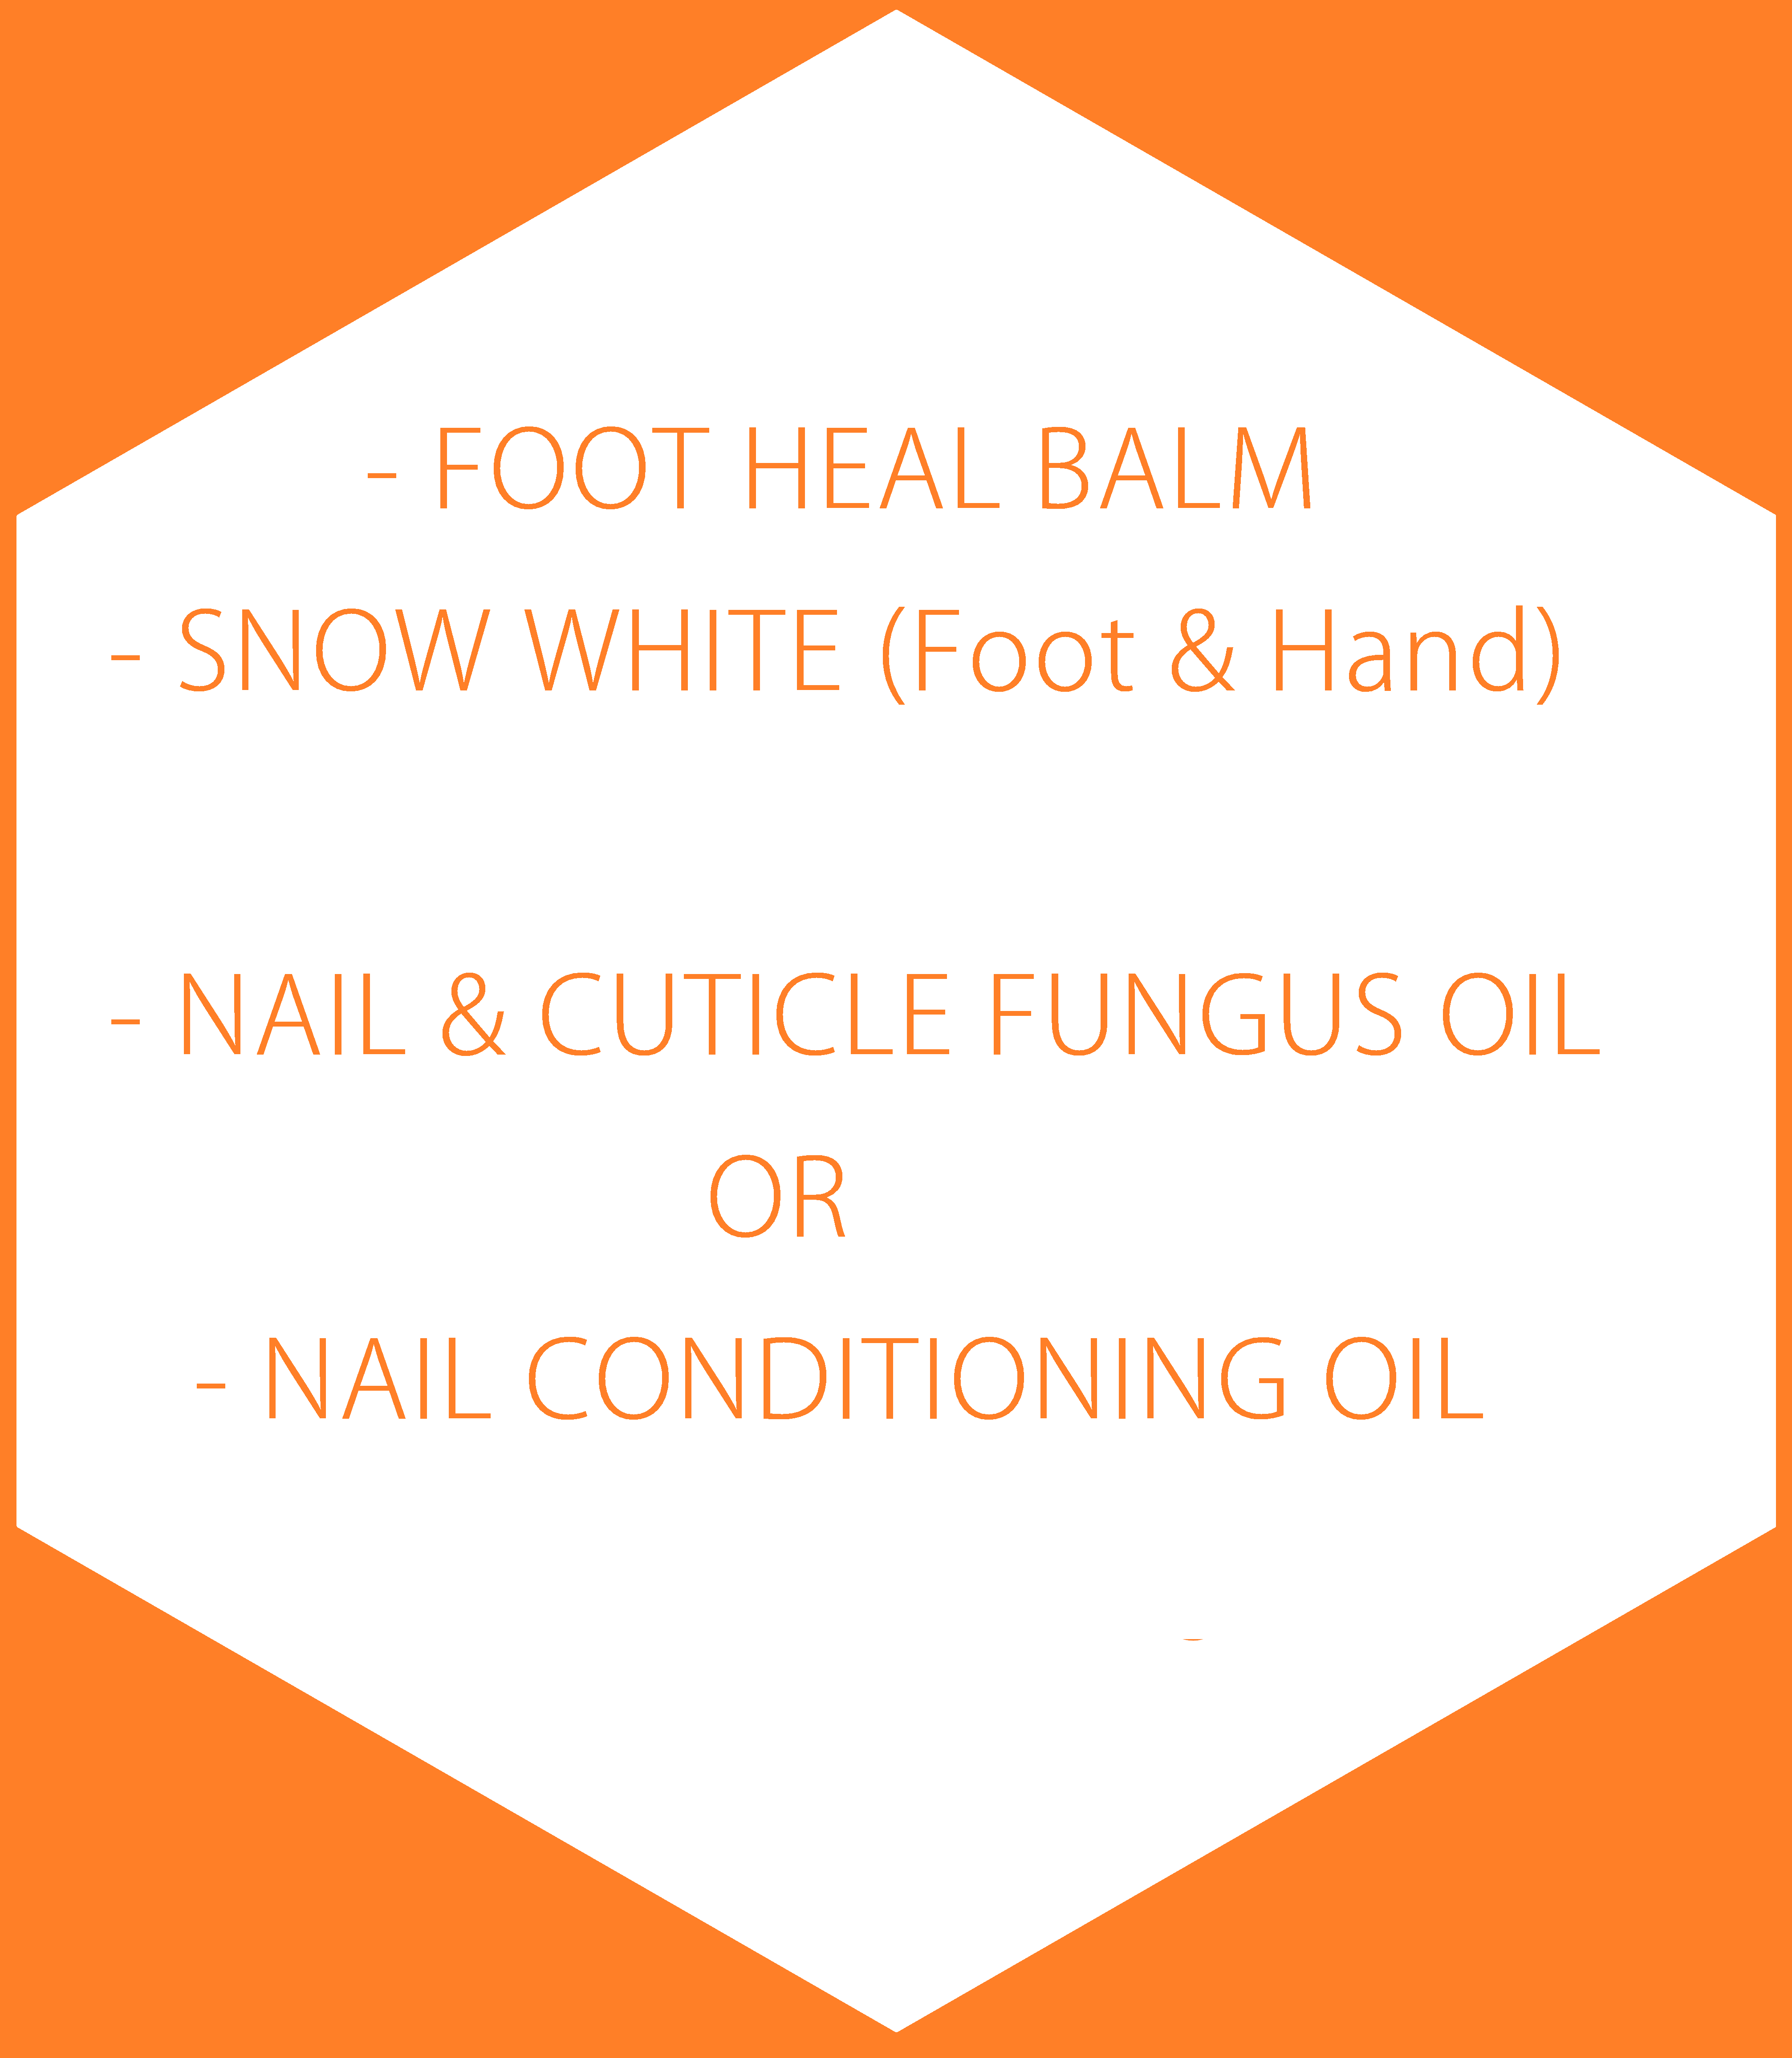 FOOT CARE - ALL IN ONE DEAL